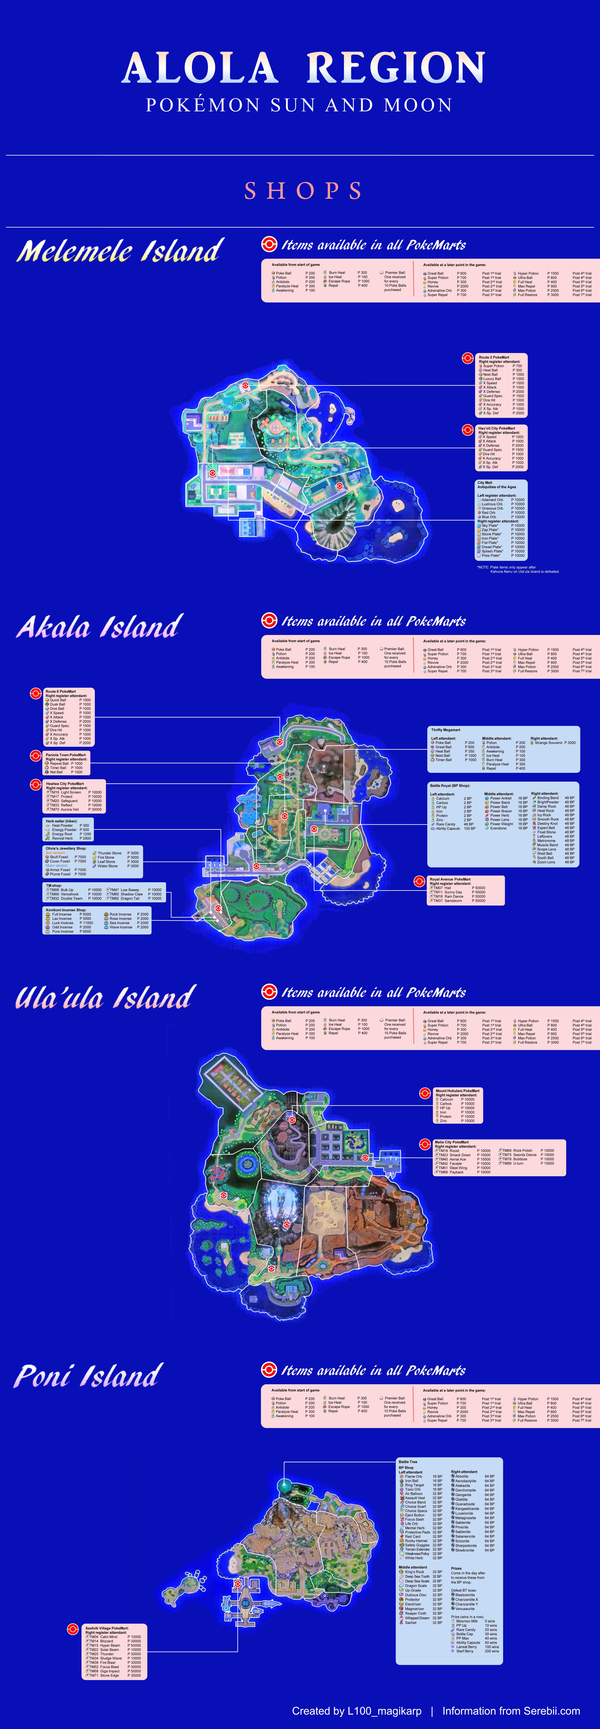 ./20161223-2259-cet-pokemon-sun-and-pokemon-moon-map-guide-5.png